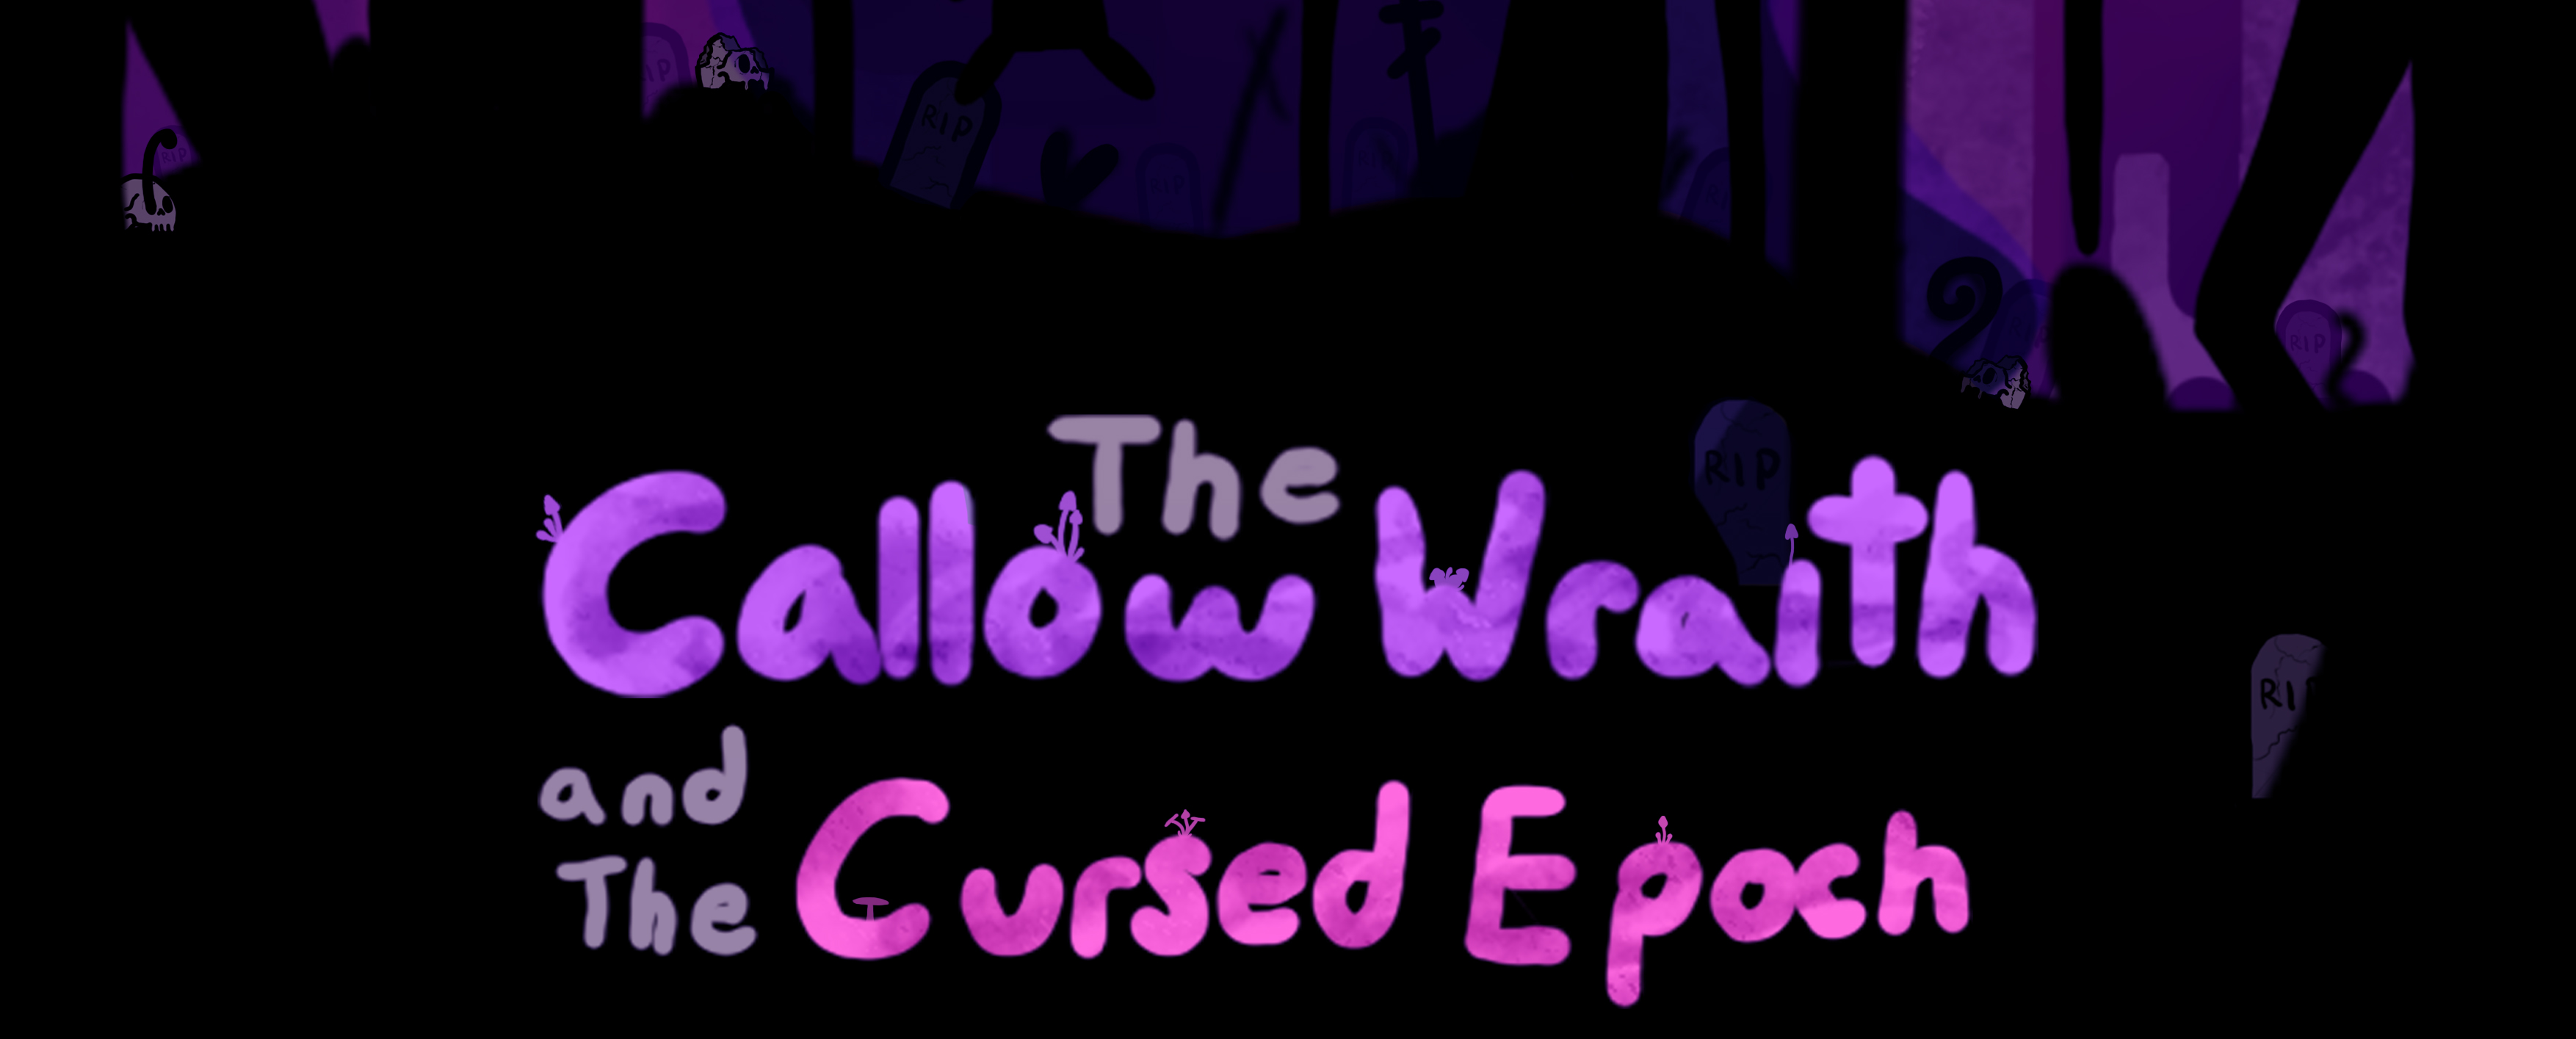 The Callow Wraith and the Hallow Epoch